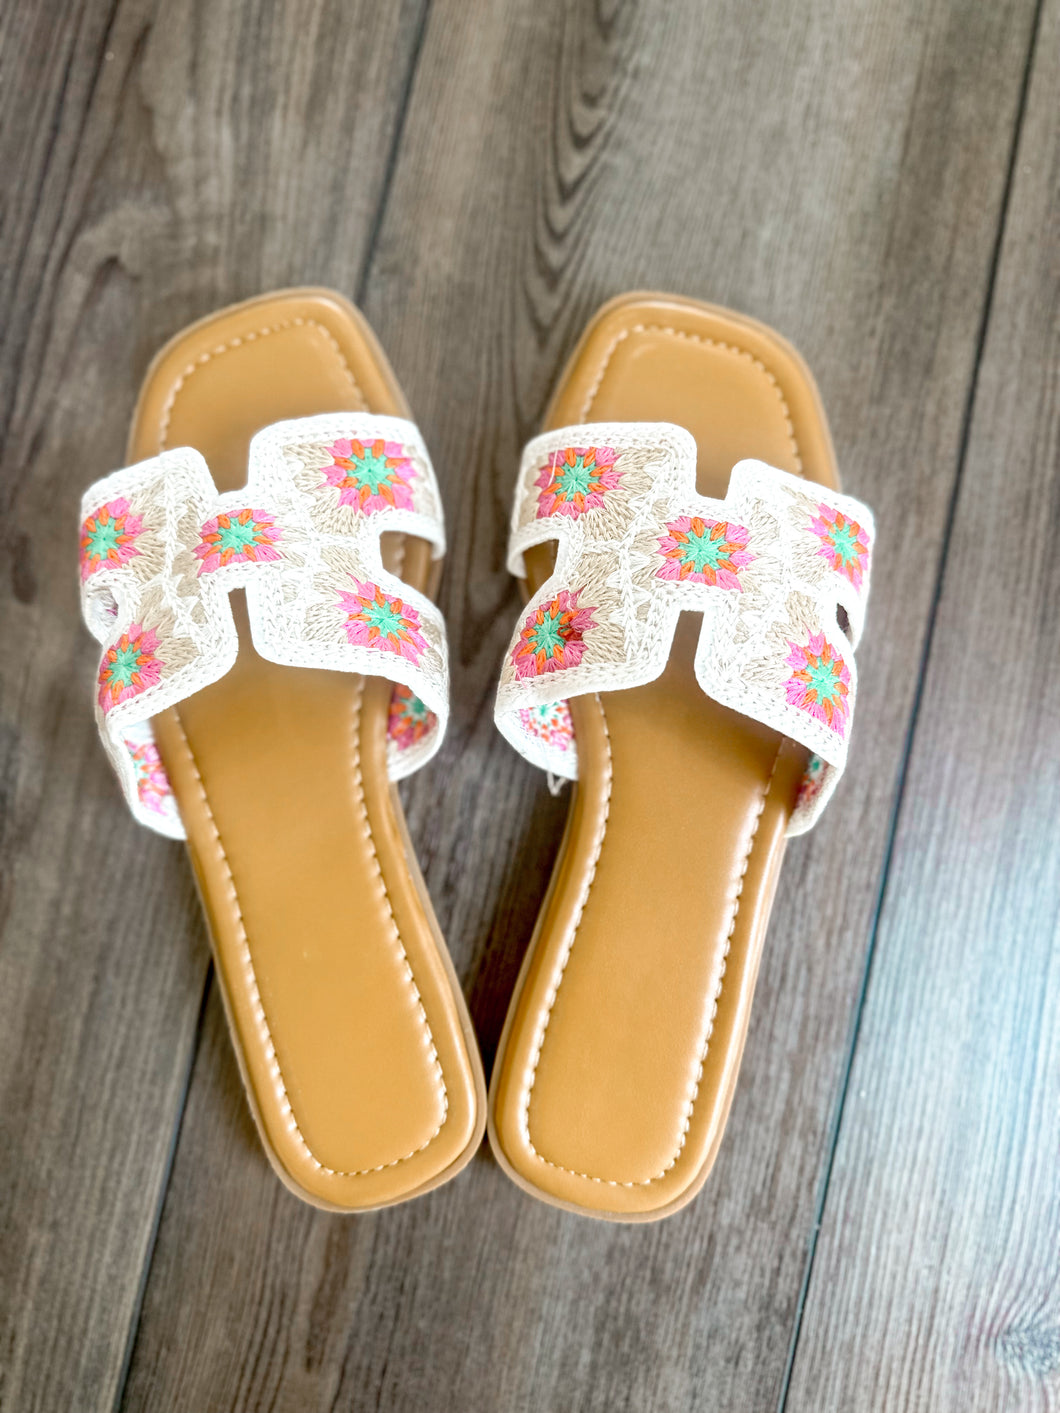 The Layla Sandals